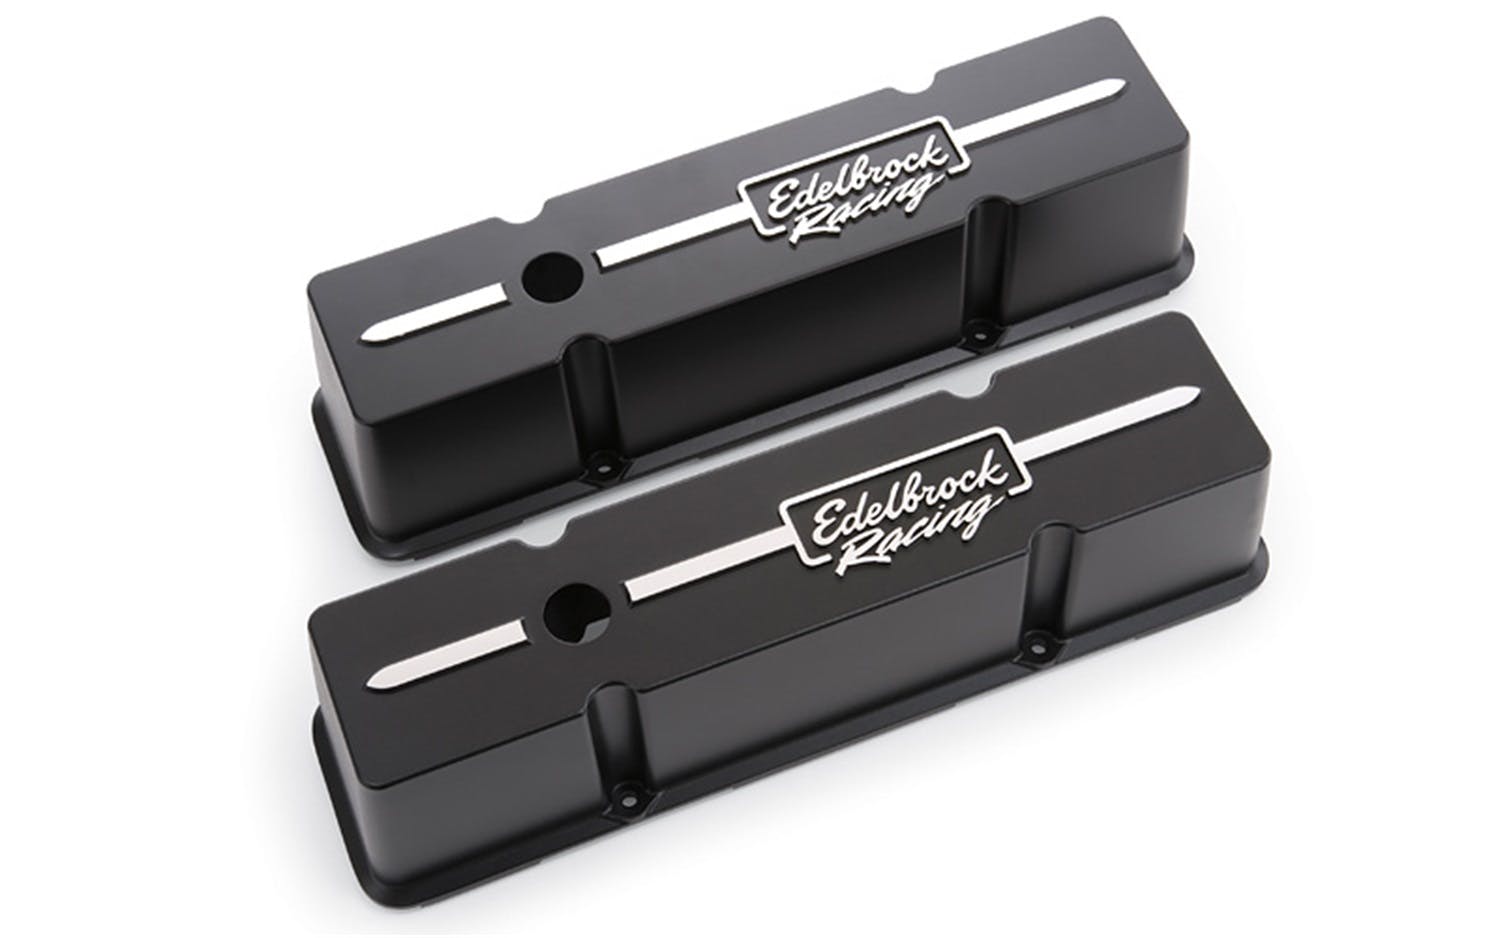 Edelbrock 41643 Racing Series Valve Covers for Chevy 262-400 V8 1959-86.